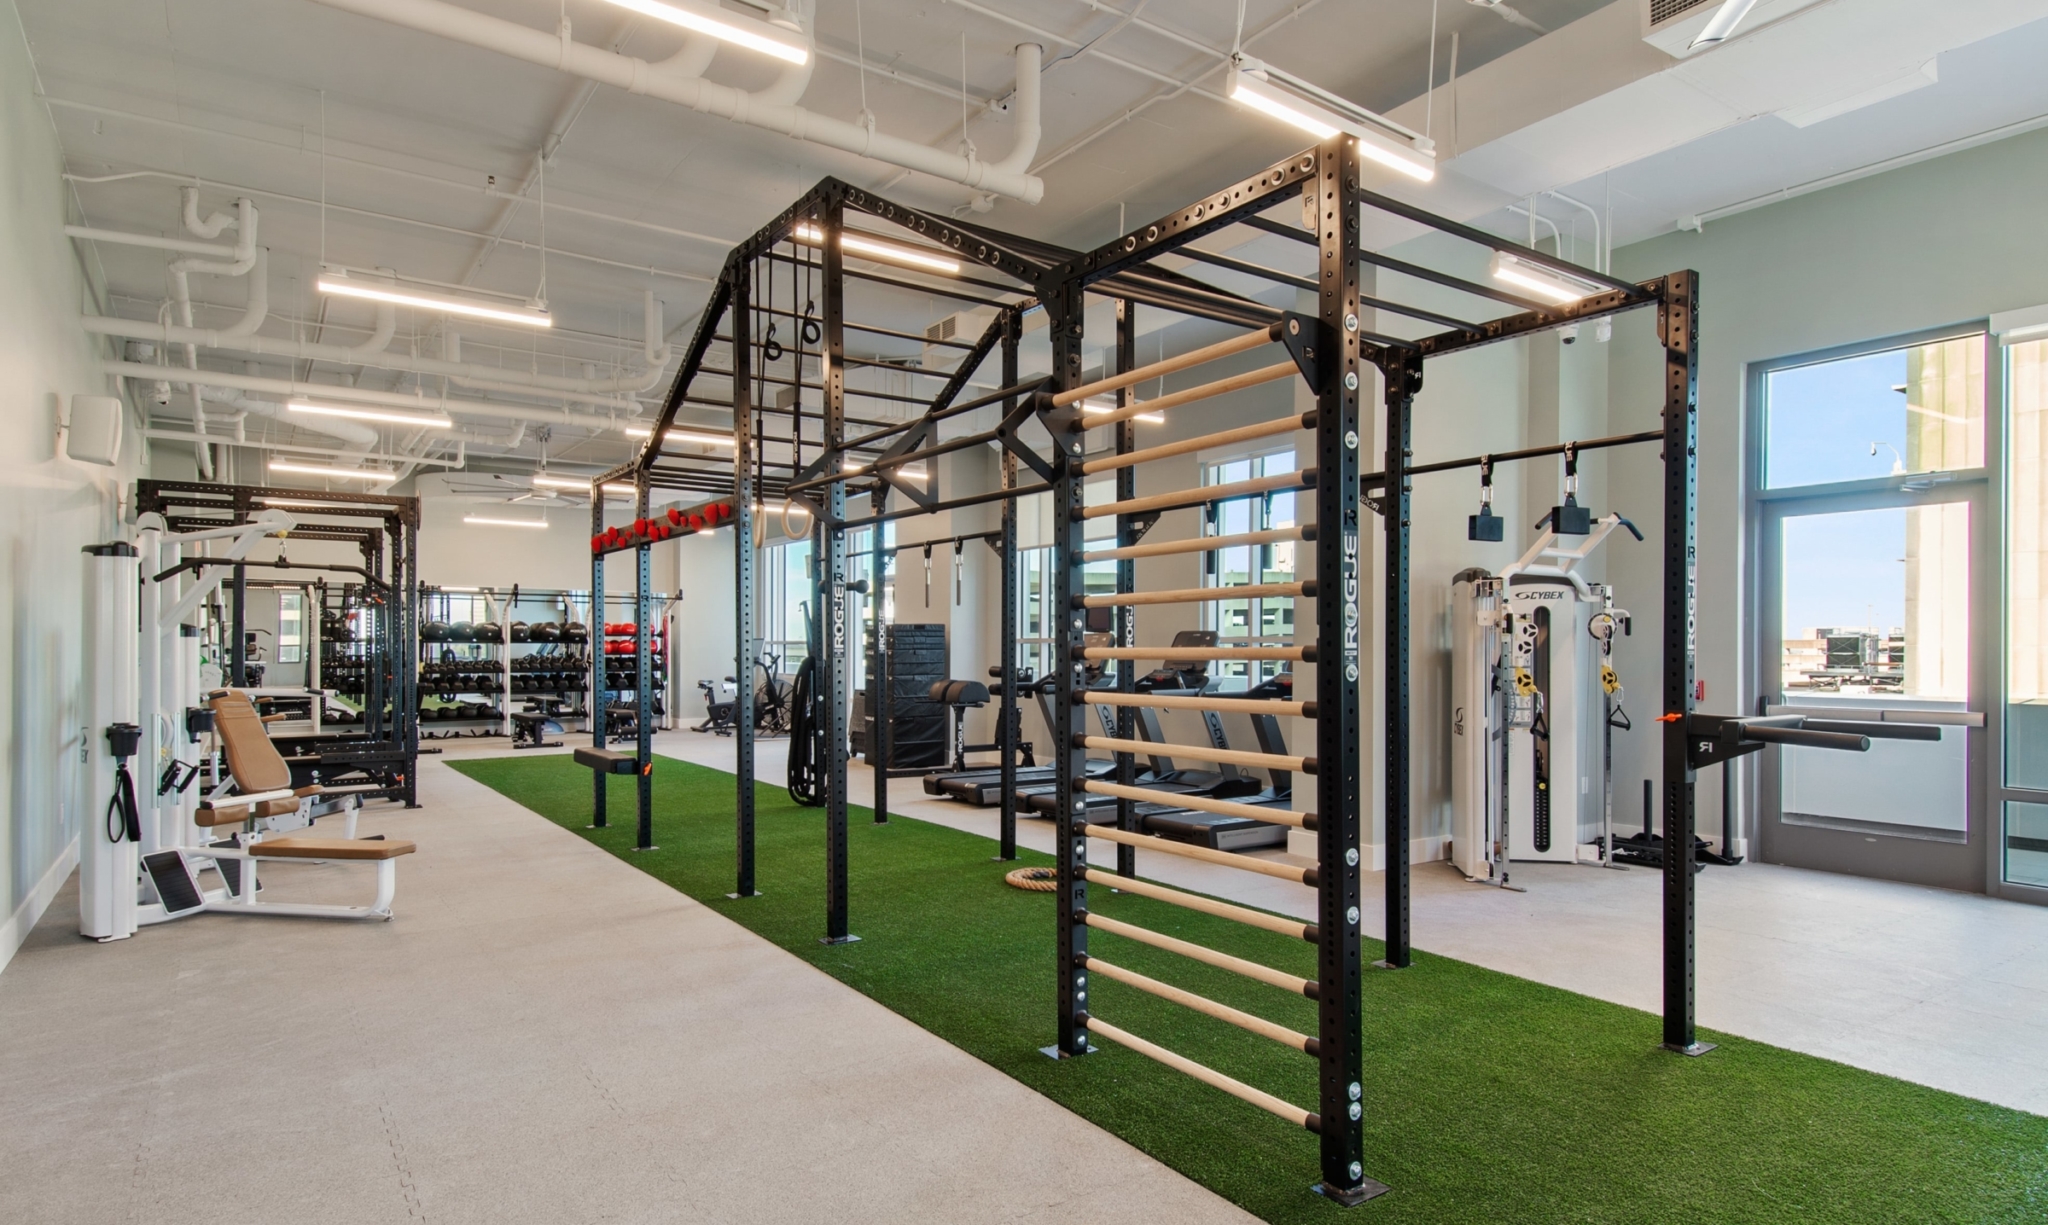 Fitness Center at The Odeon featuring cardio and weight equipment and a clean, bright space.